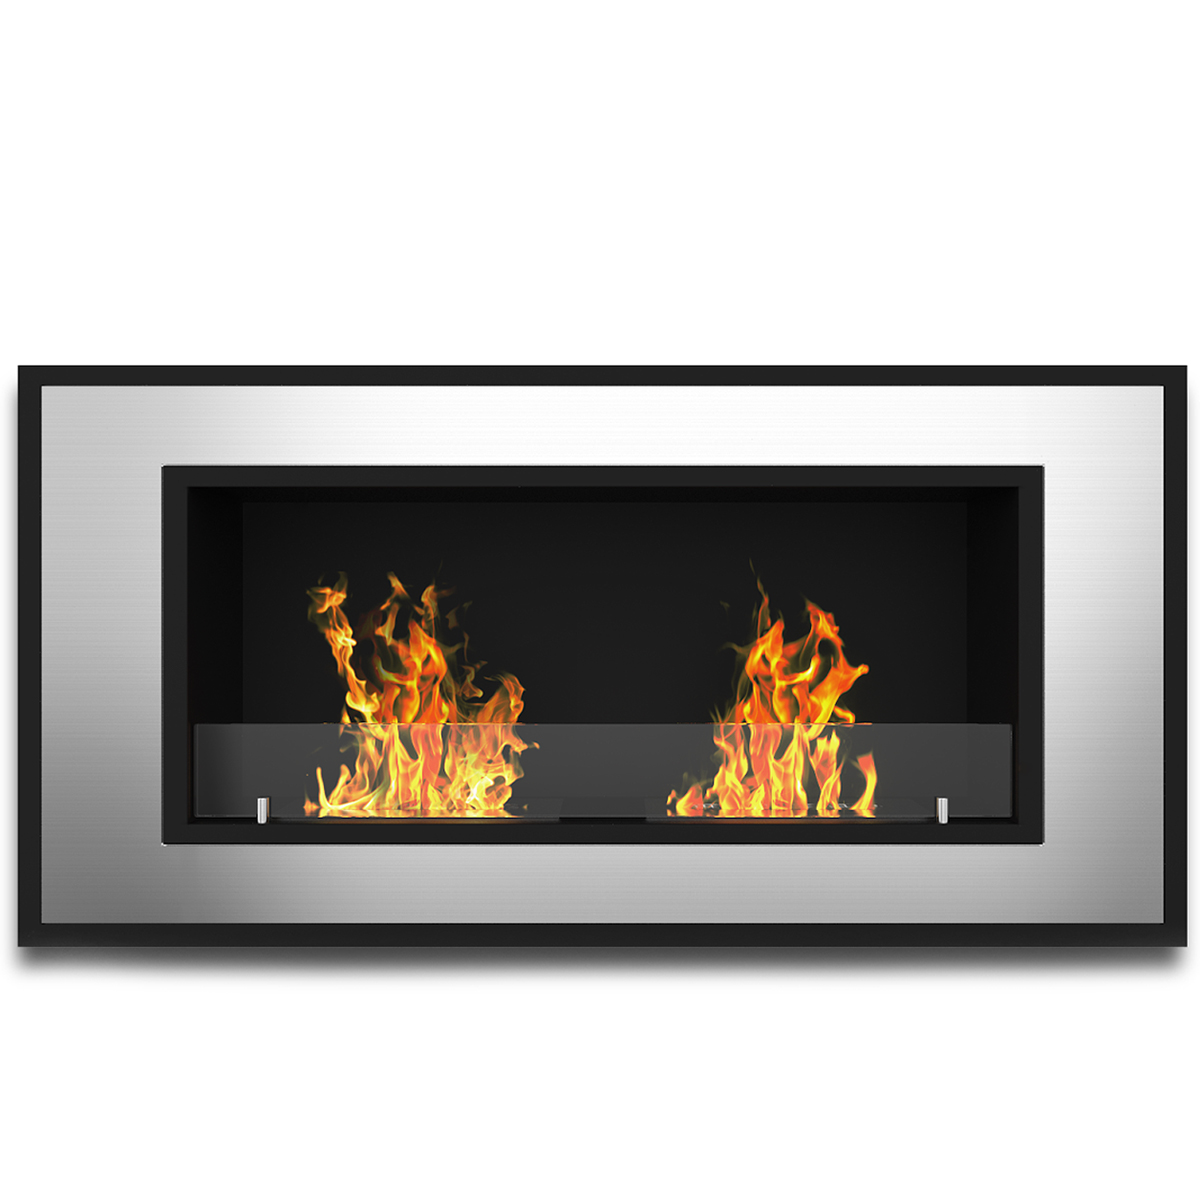 Regal Flame ER8005-MF2 47 in. Brooks Ventless Built In Recessed Bio Ethanol Wall Mounted Fireplace